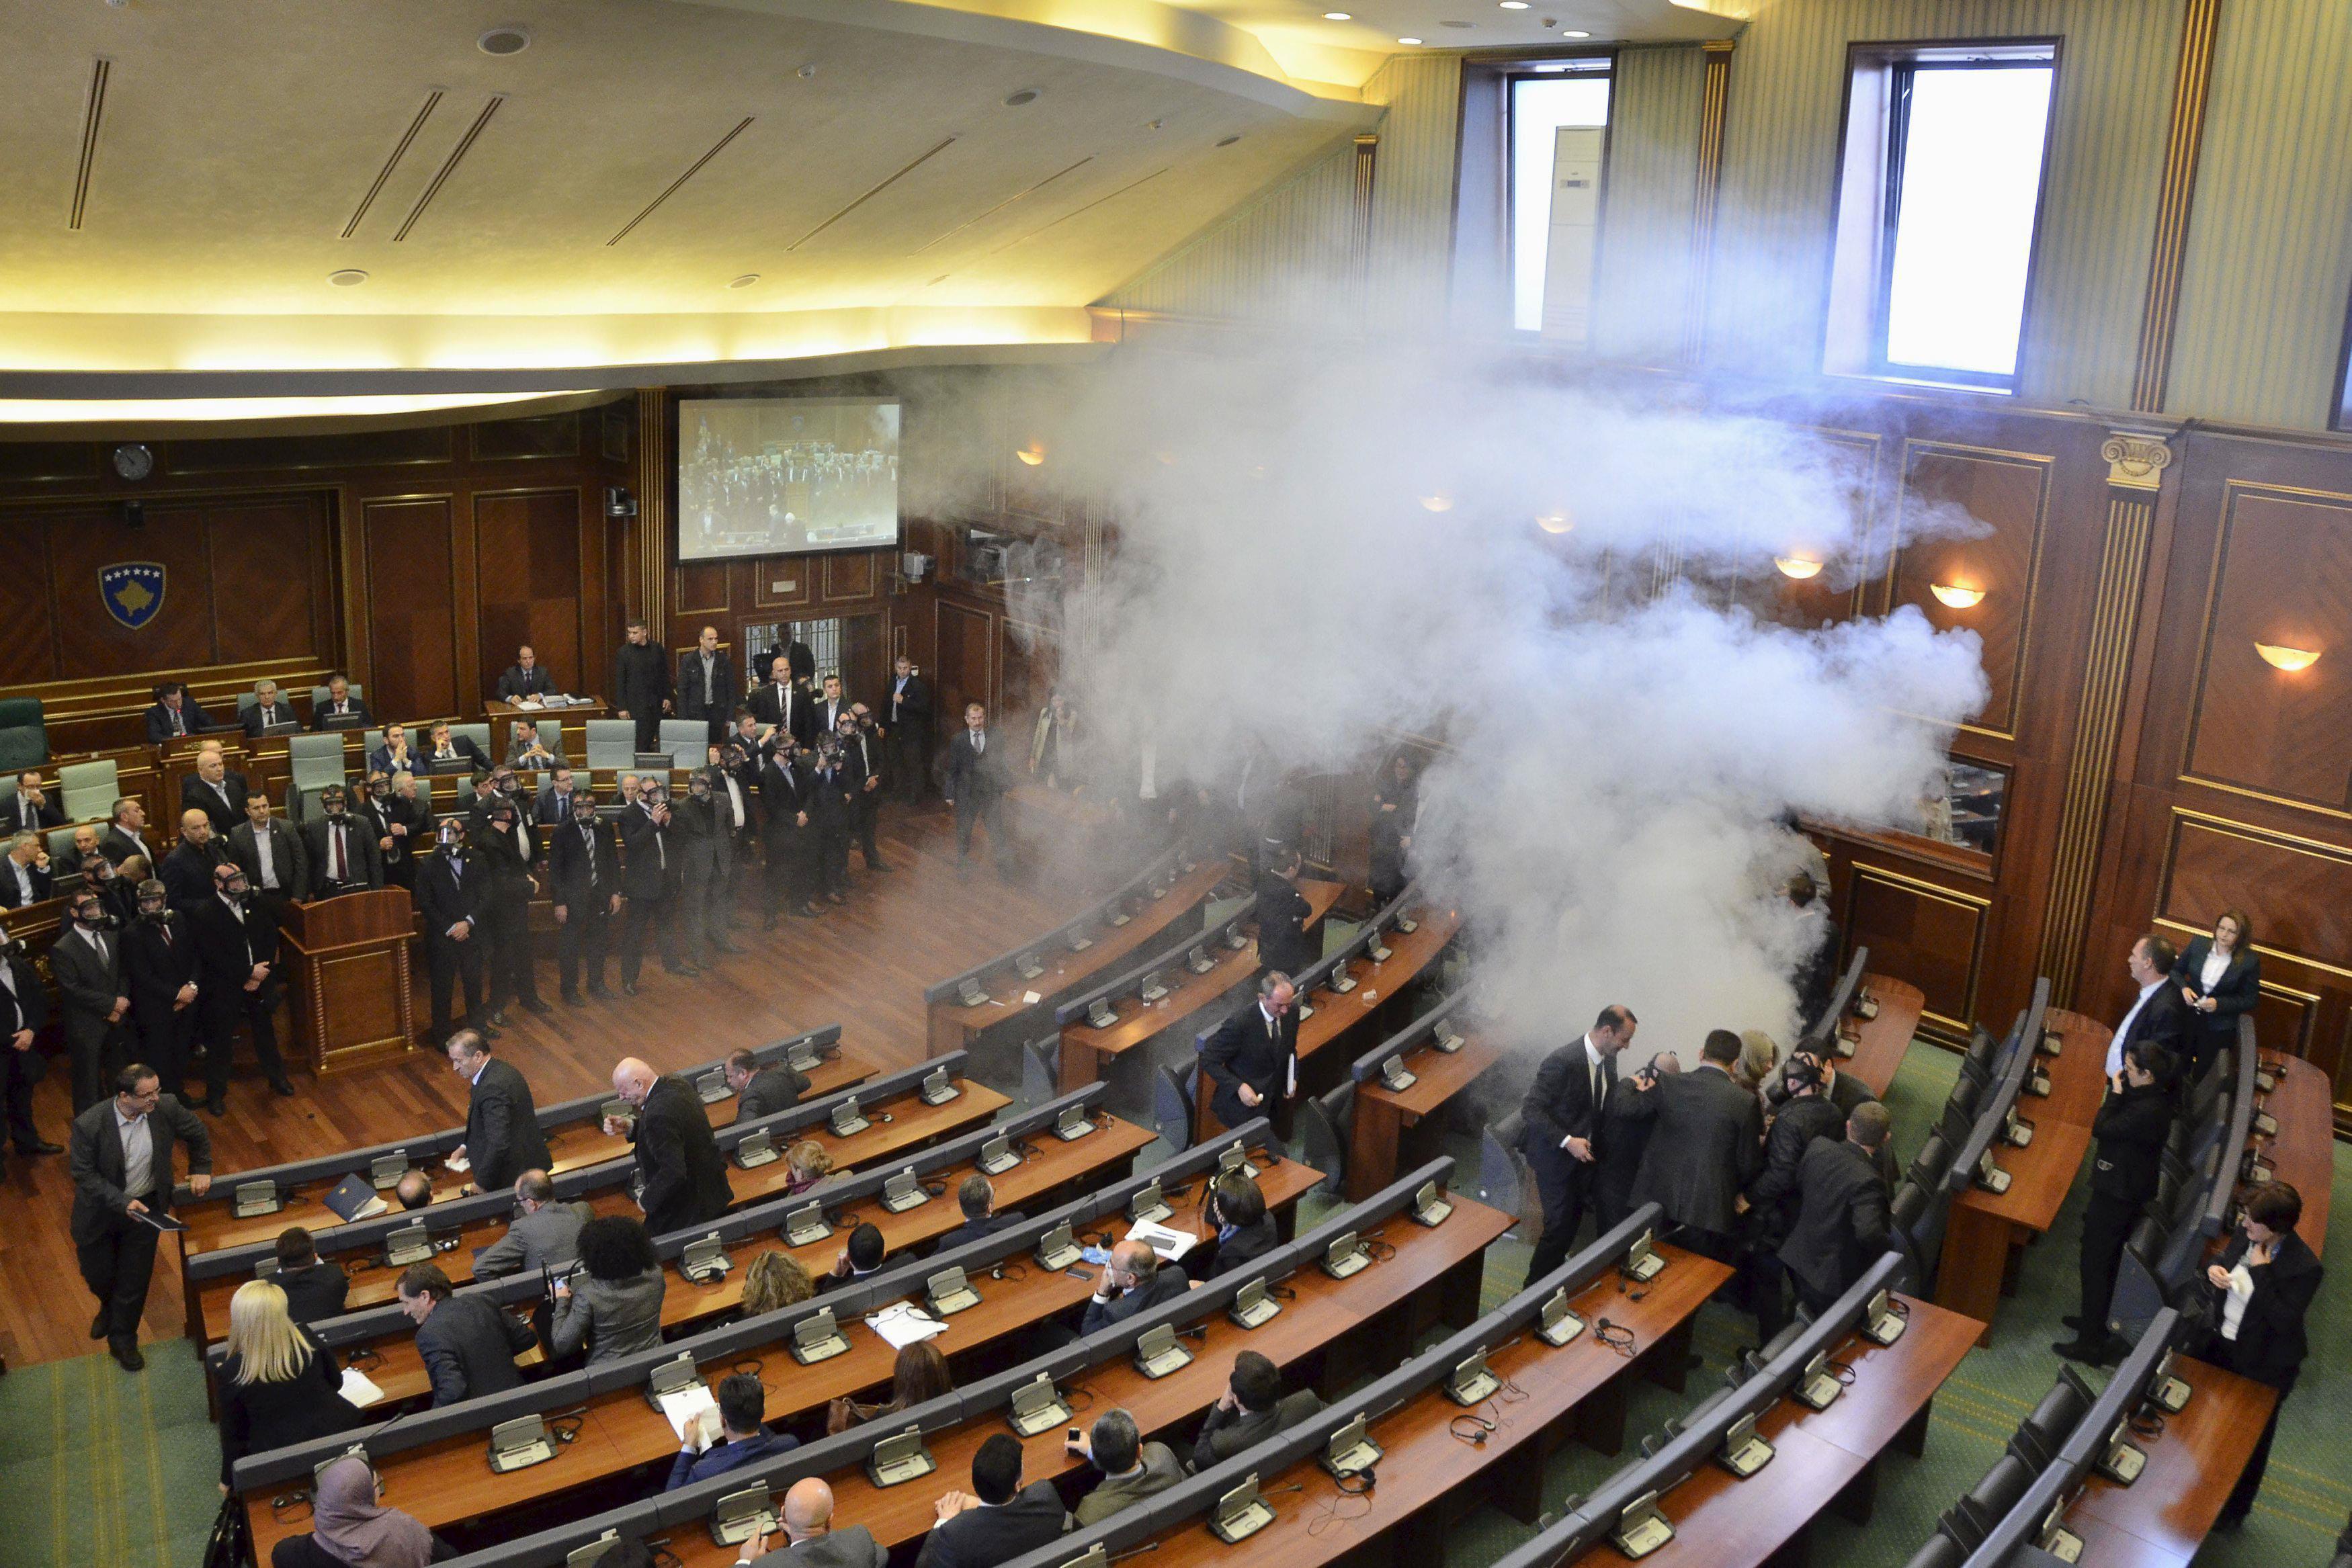 Opposition politicians release tear gas in parliament to obstruct a session in Pristina